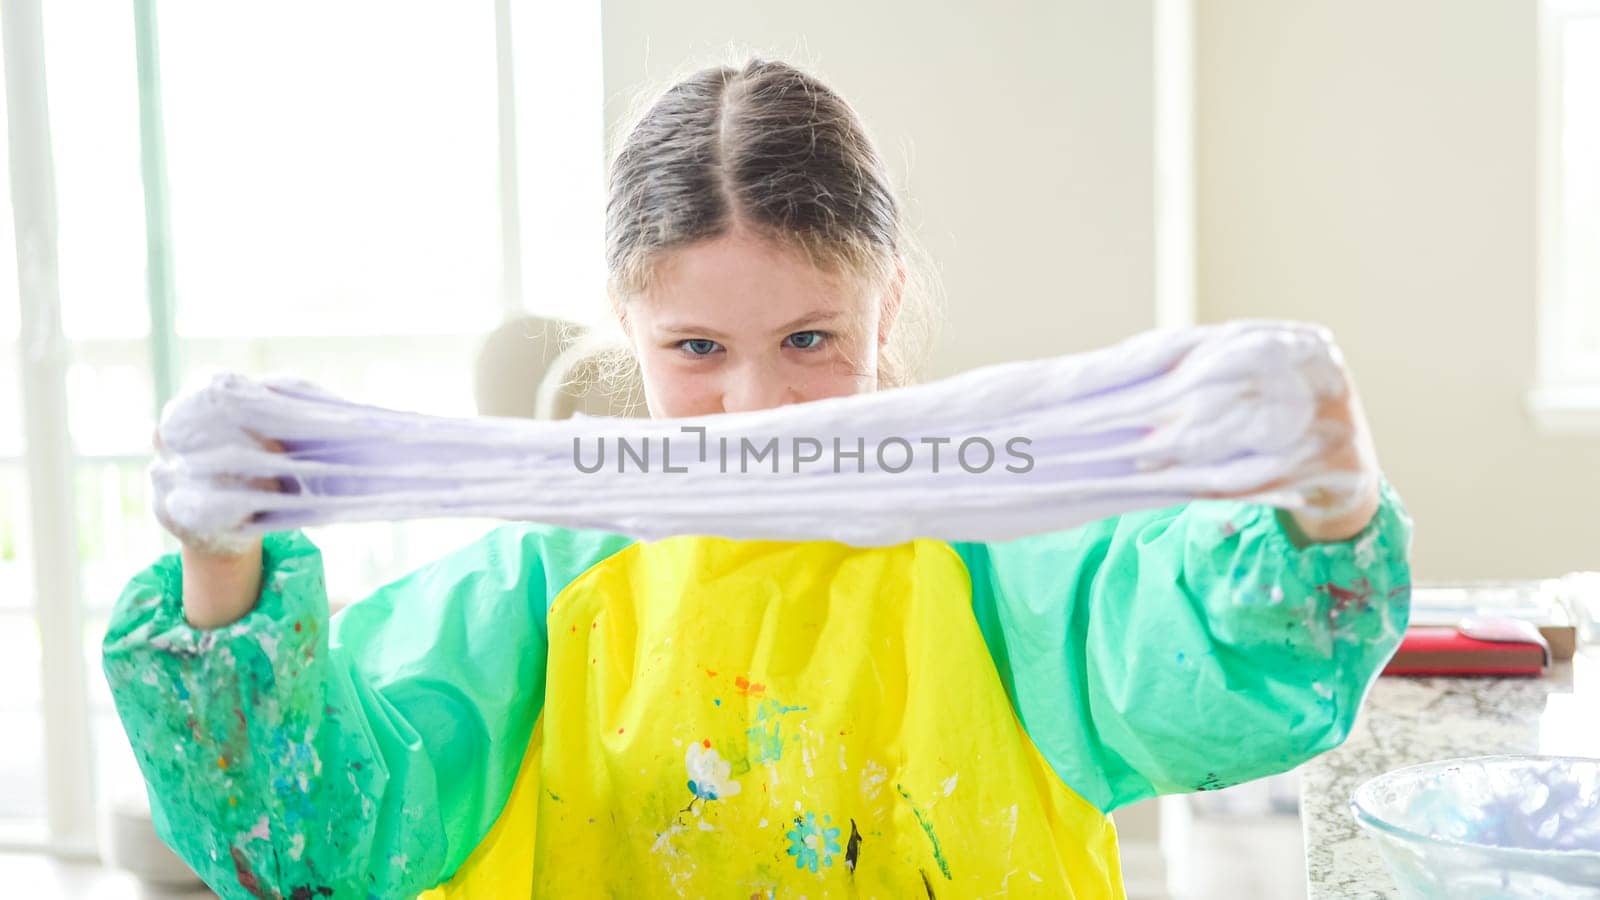 Homeschooled Little Girl Crafting Slime in Modern Kitchen by arinahabich